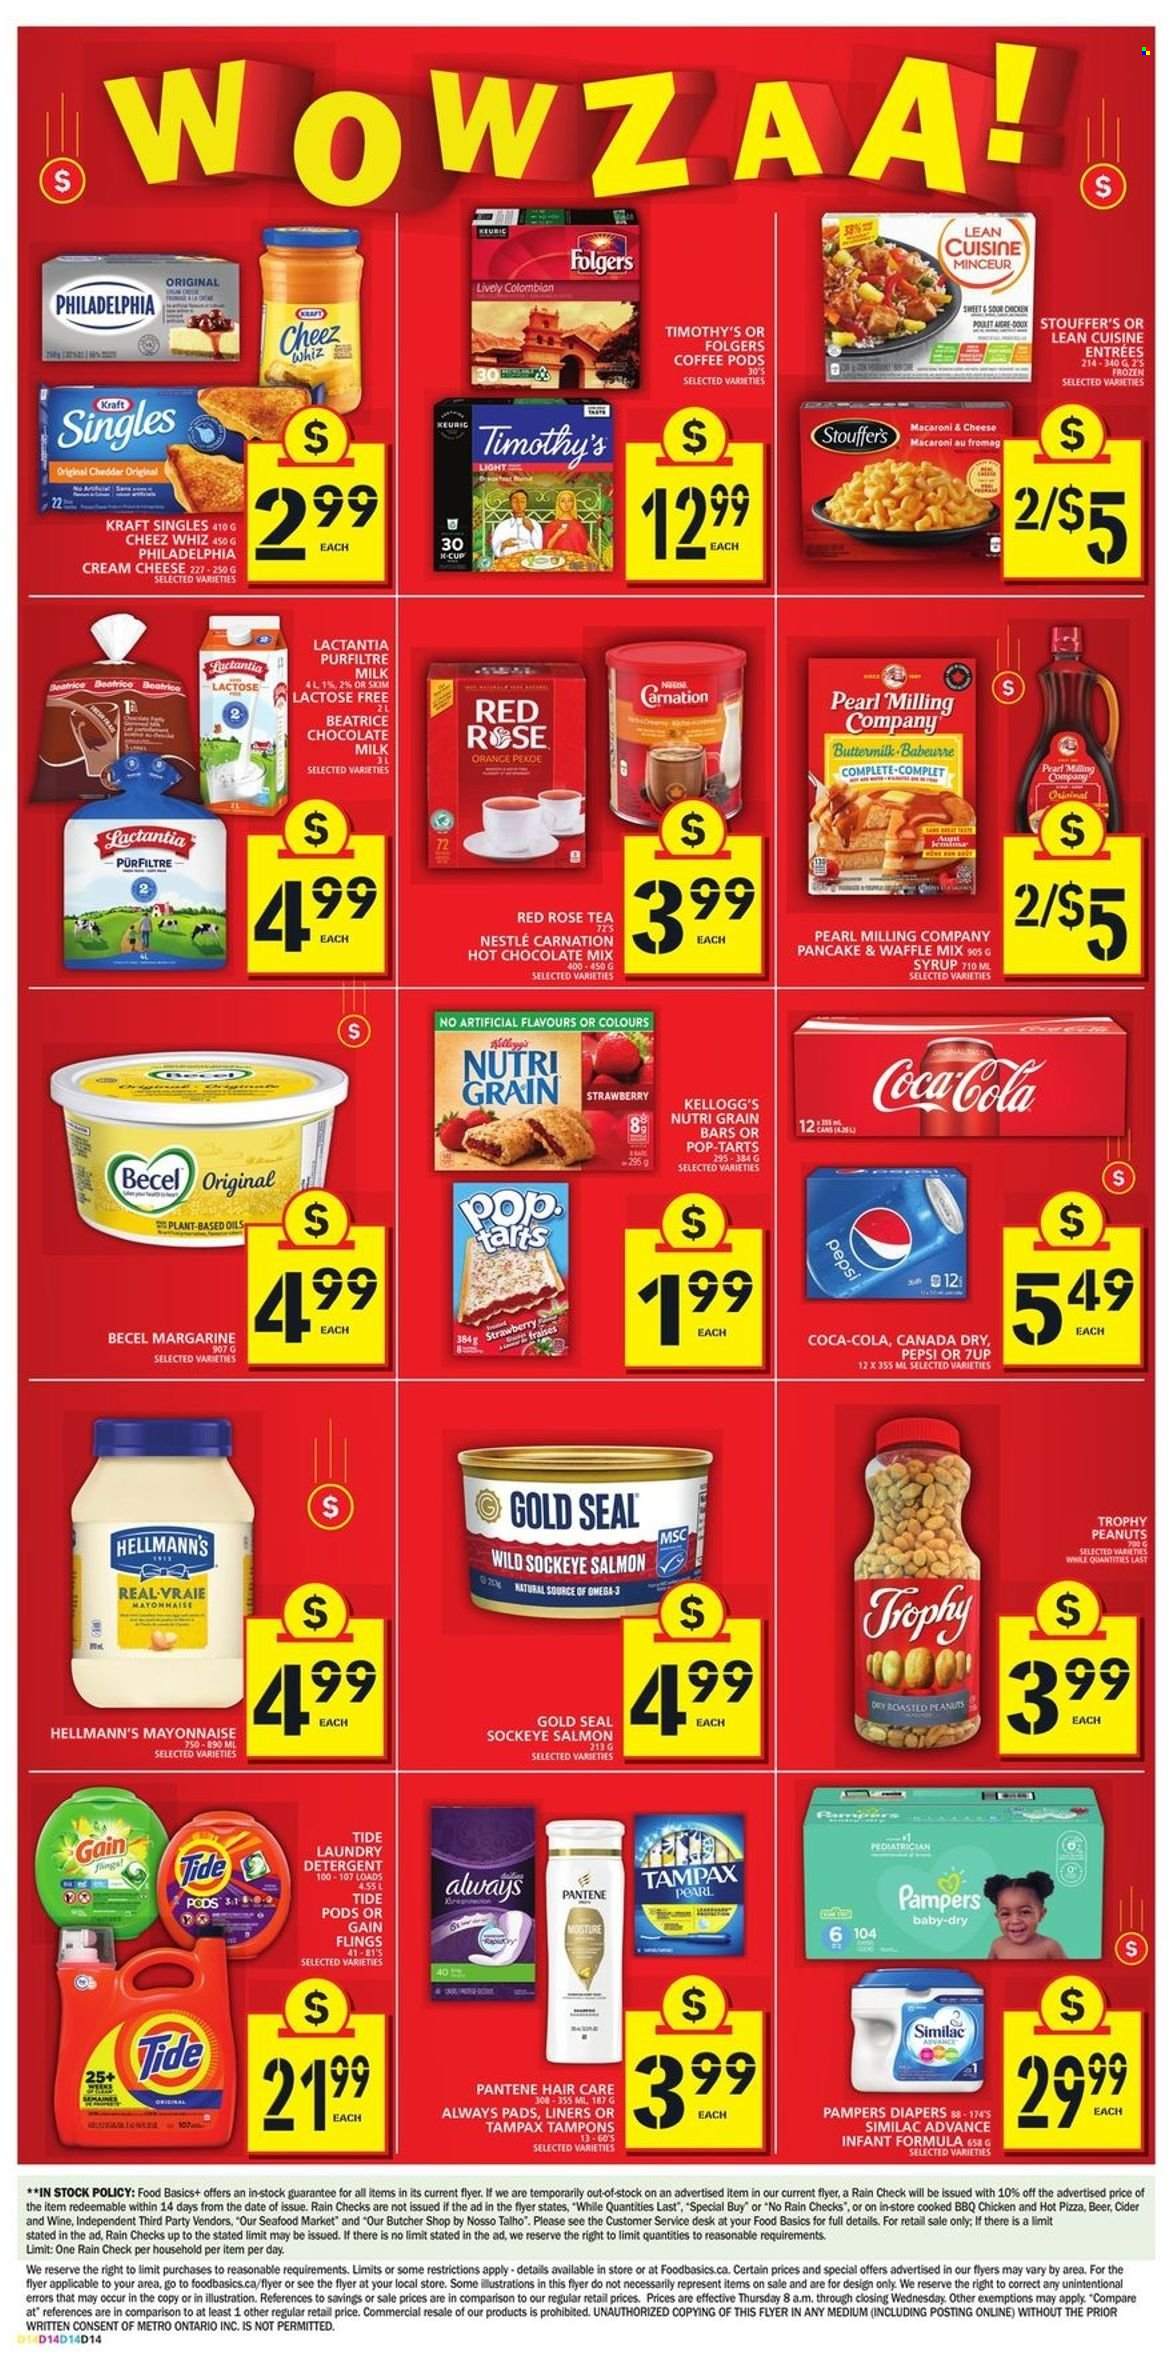 thumbnail - Food Basics Flyer - January 20, 2022 - January 26, 2022 - Sales products - salmon, seafood, macaroni & cheese, pizza, pancakes, Lean Cuisine, Kraft®, cream cheese, sandwich slices, Kraft Singles, buttermilk, margarine, mayonnaise, Hellmann’s, Stouffer's, milk chocolate, Kellogg's, Pop-Tarts, Nutri-Grain, syrup, peanuts, Canada Dry, Coca-Cola, Pepsi, 7UP, hot chocolate, tea, coffee pods, Folgers, wine, rosé wine, cider, beer, Similac, nappies, Gain, Tide, laundry detergent, Always pads, tampons, Nestlé, detergent, Tampax, Philadelphia, Pampers, Pantene. Page 8.